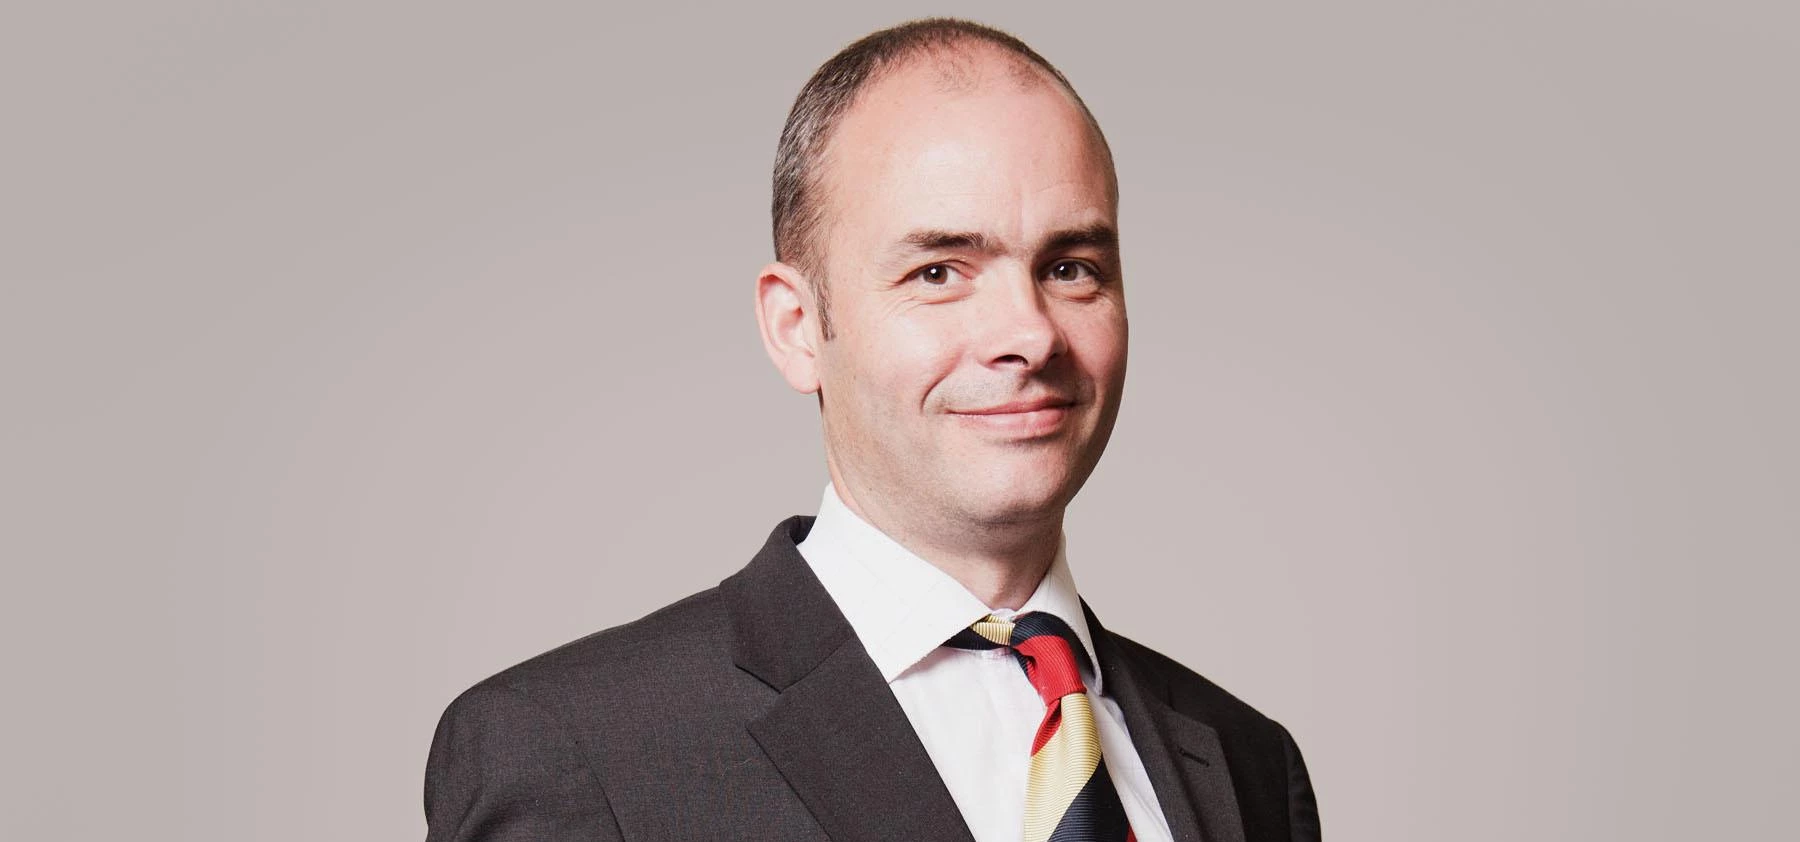 Nick Smith, Partner and Head of Employment at Mincoffs Solicitors.